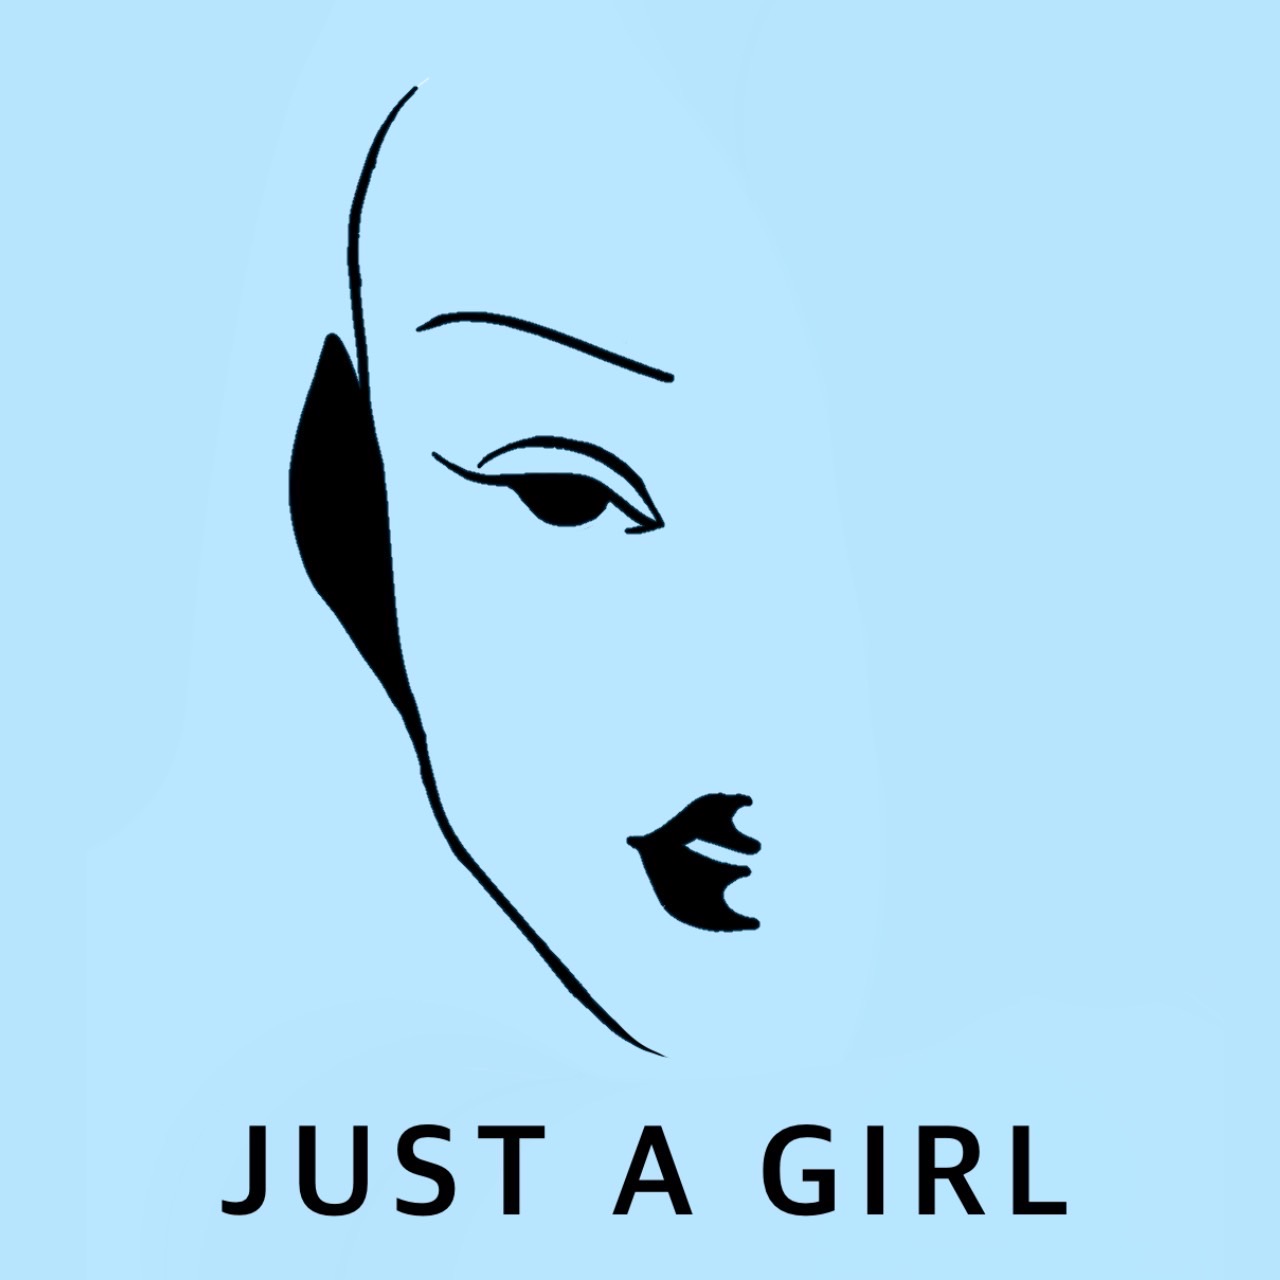 JUST A GIRL